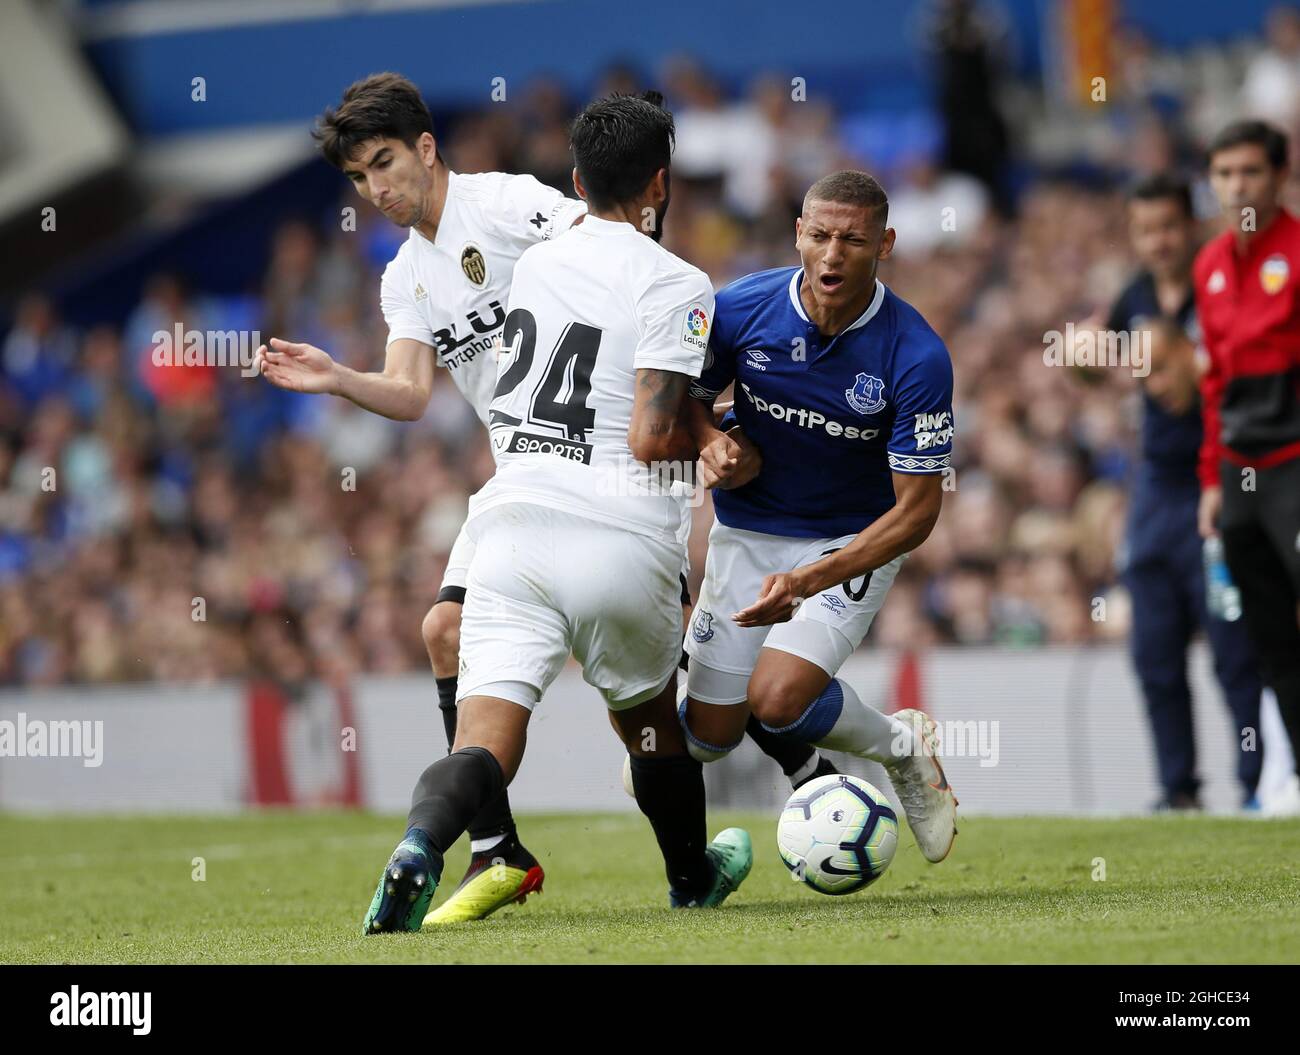 Everton's Richarlison tussles with Valencia's Ezequiel Garay during the pre-season friendly match at the Goodison Park Stadium, Liverpool. Picture date 4th August 2018. Picture credit should read: David Klein/Sportimage via PA Images Stock Photo